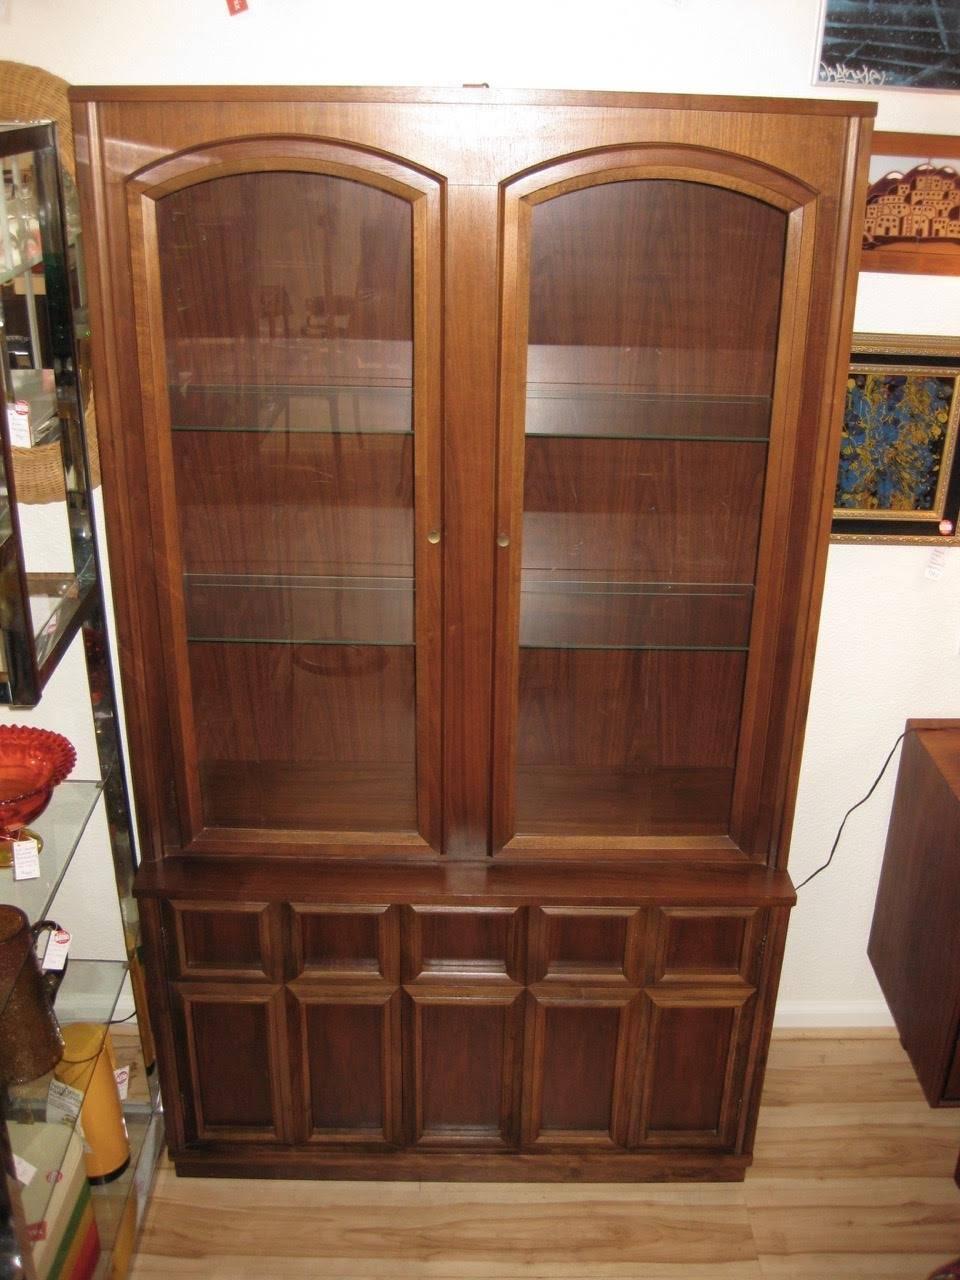 Mid-Century Modern walnut china hutch or cabinet. Cabinet has two glass doors on upper cabinet with two glass shelves with grooved tracks for plate display and light. Panelled base has two doors with a shelf on one side and drawer on other